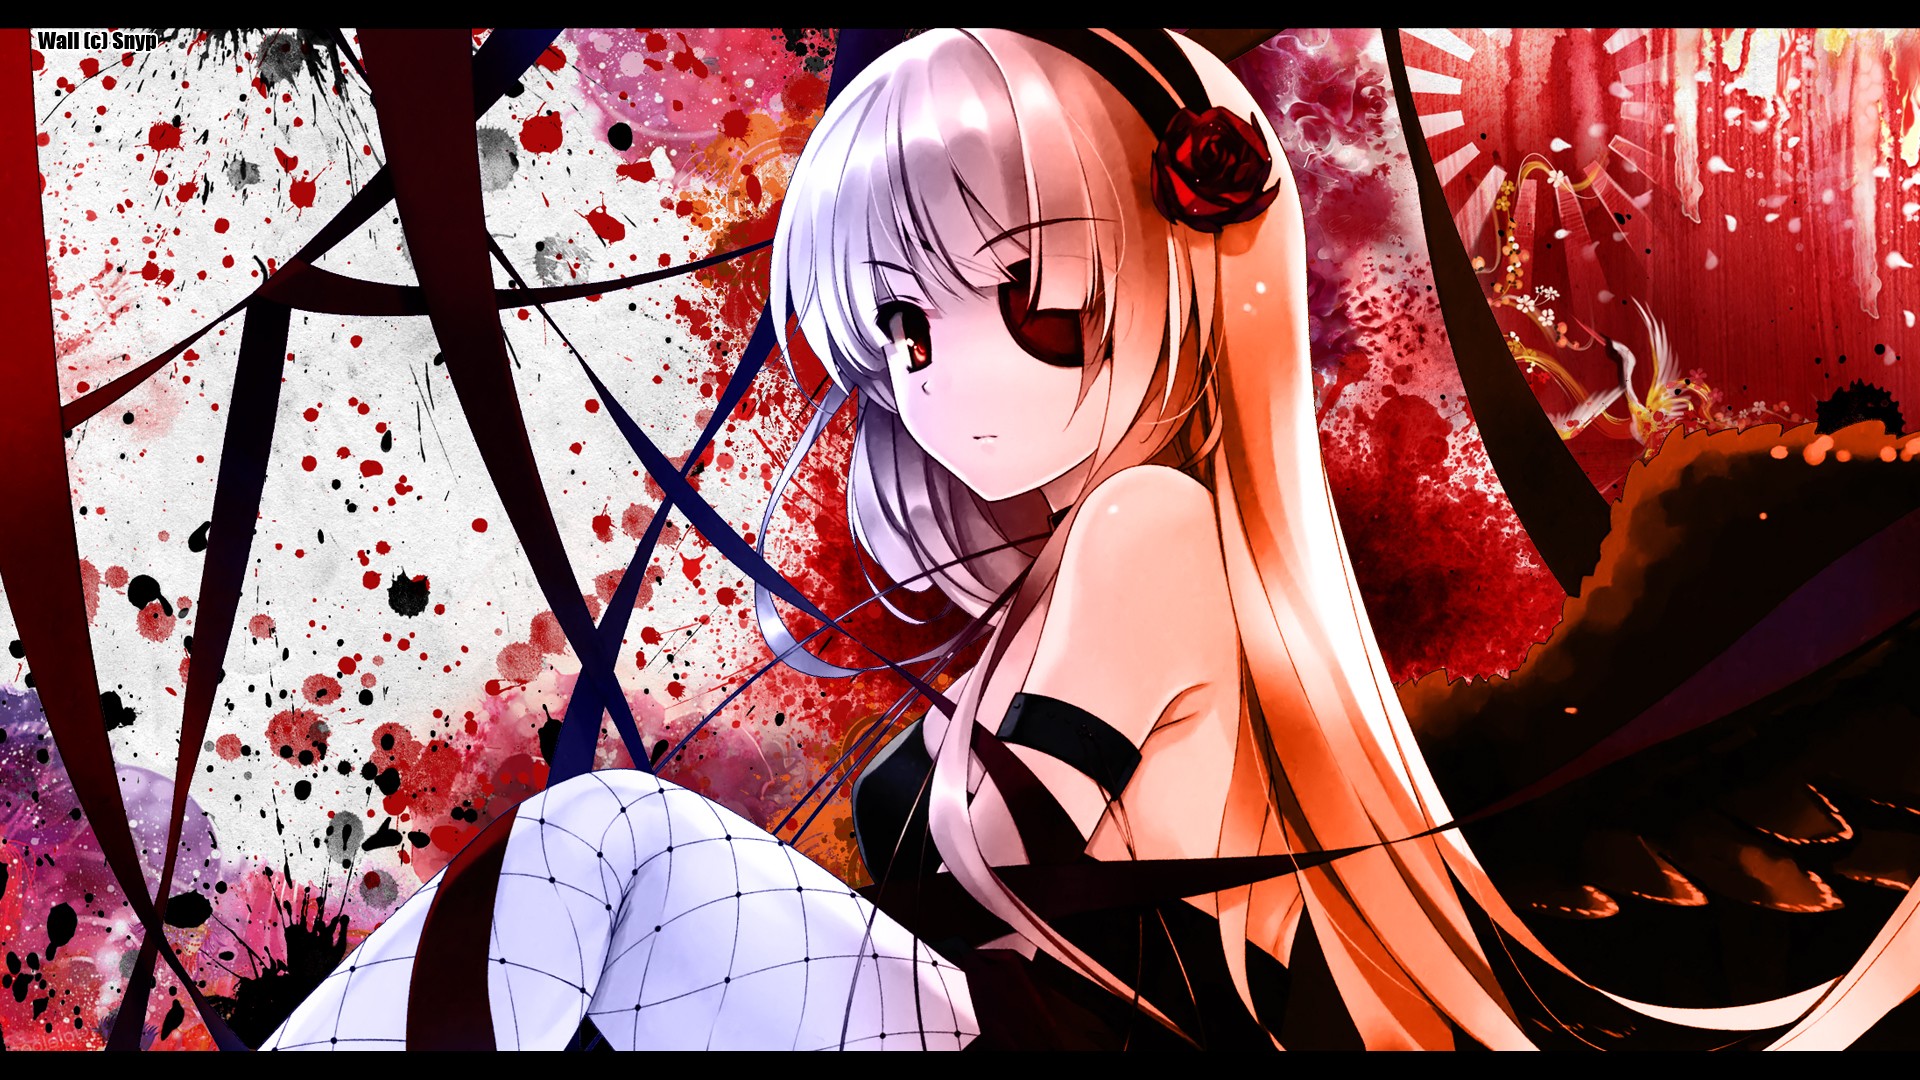 Snyp, Anime, Eyepatches, Anime Girls, Original Characters Wallpaper